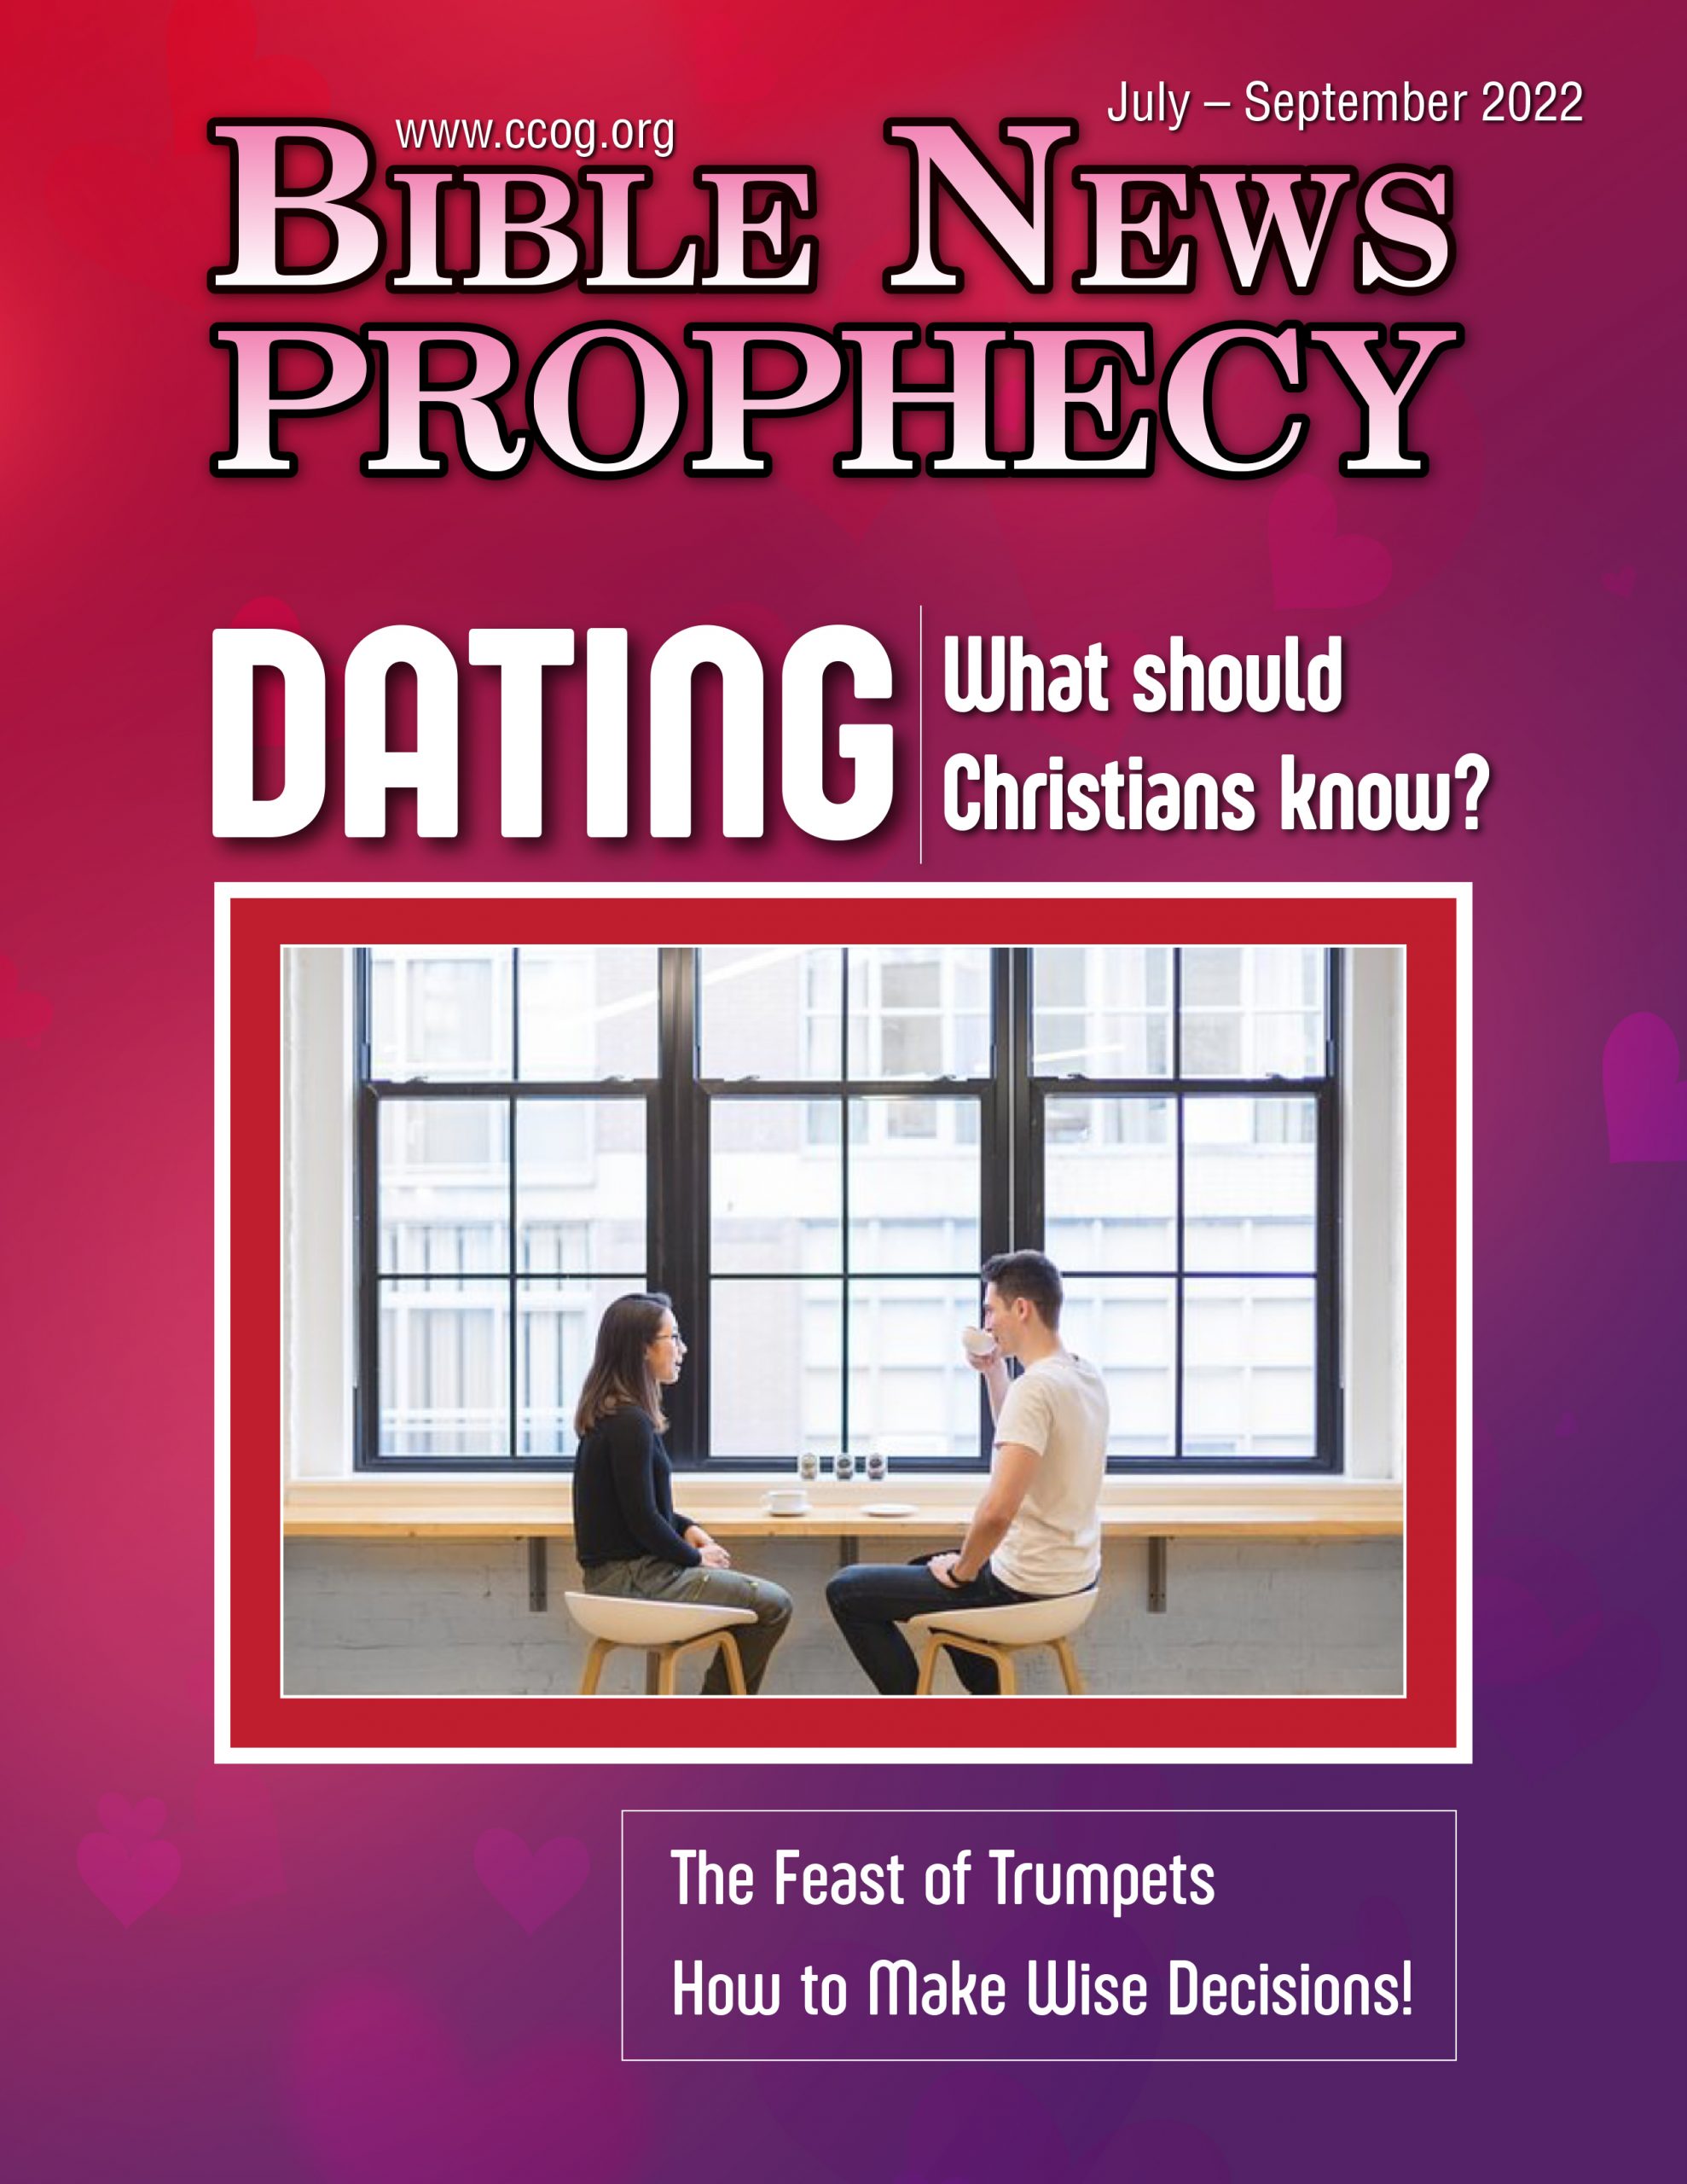 Bible News Prophecy July – September 2022: Dating What should Christians know?